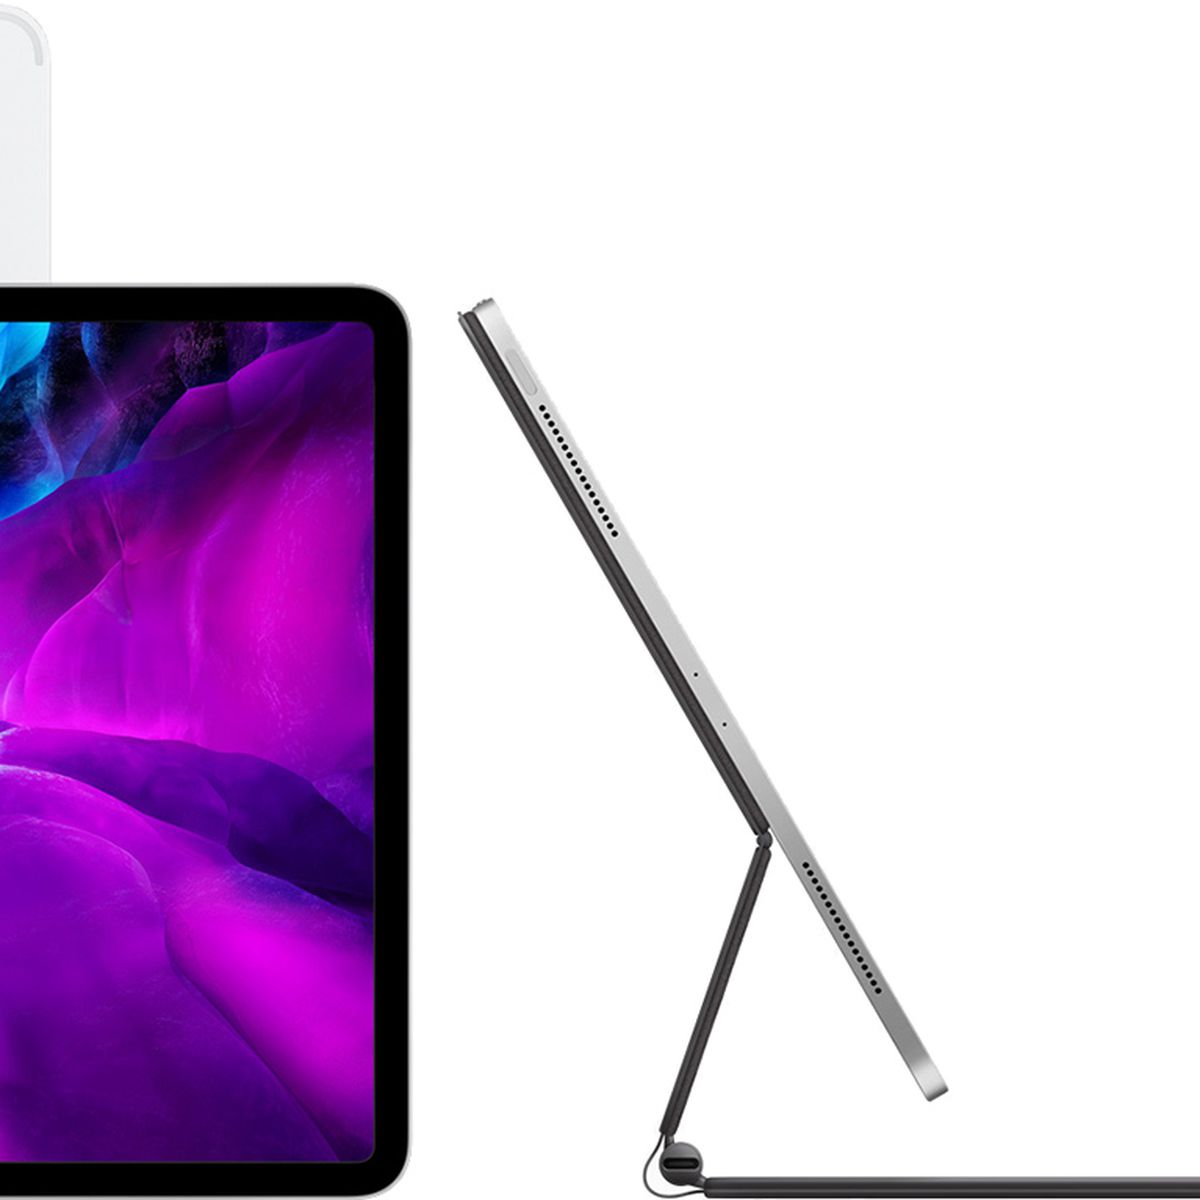 New 12.9-inch M1 iPad Pro Does Not Work With Older Magic Keyboards